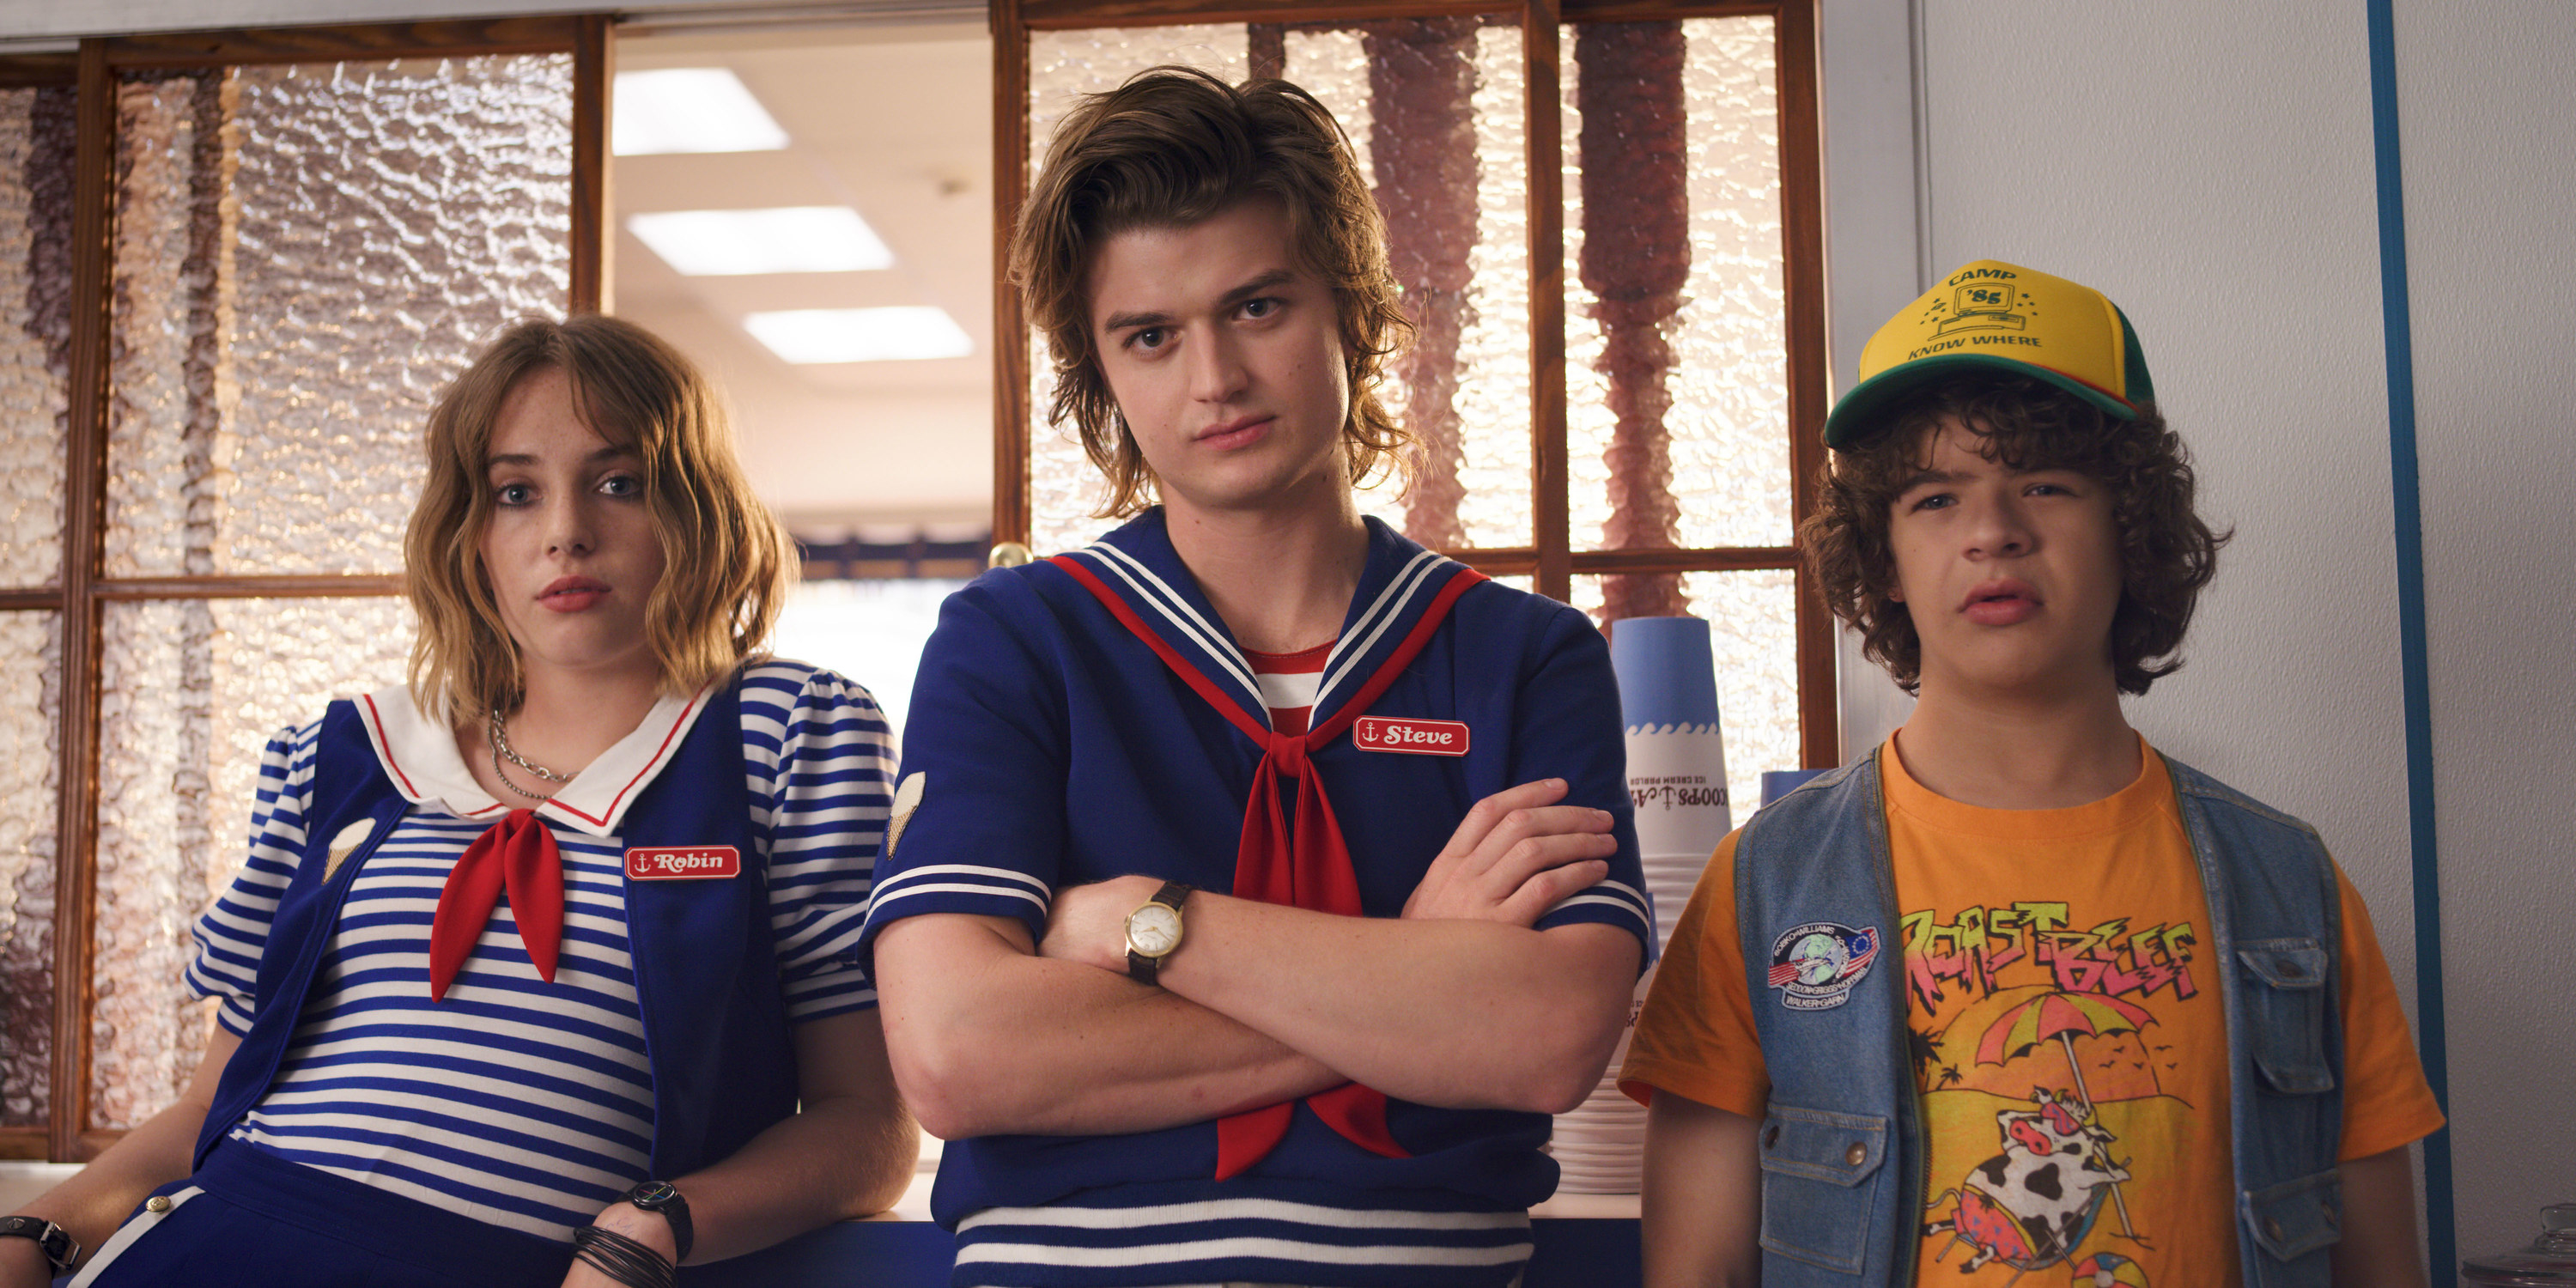 Joe's character Steve wears a sailor uniform while standing next to costars